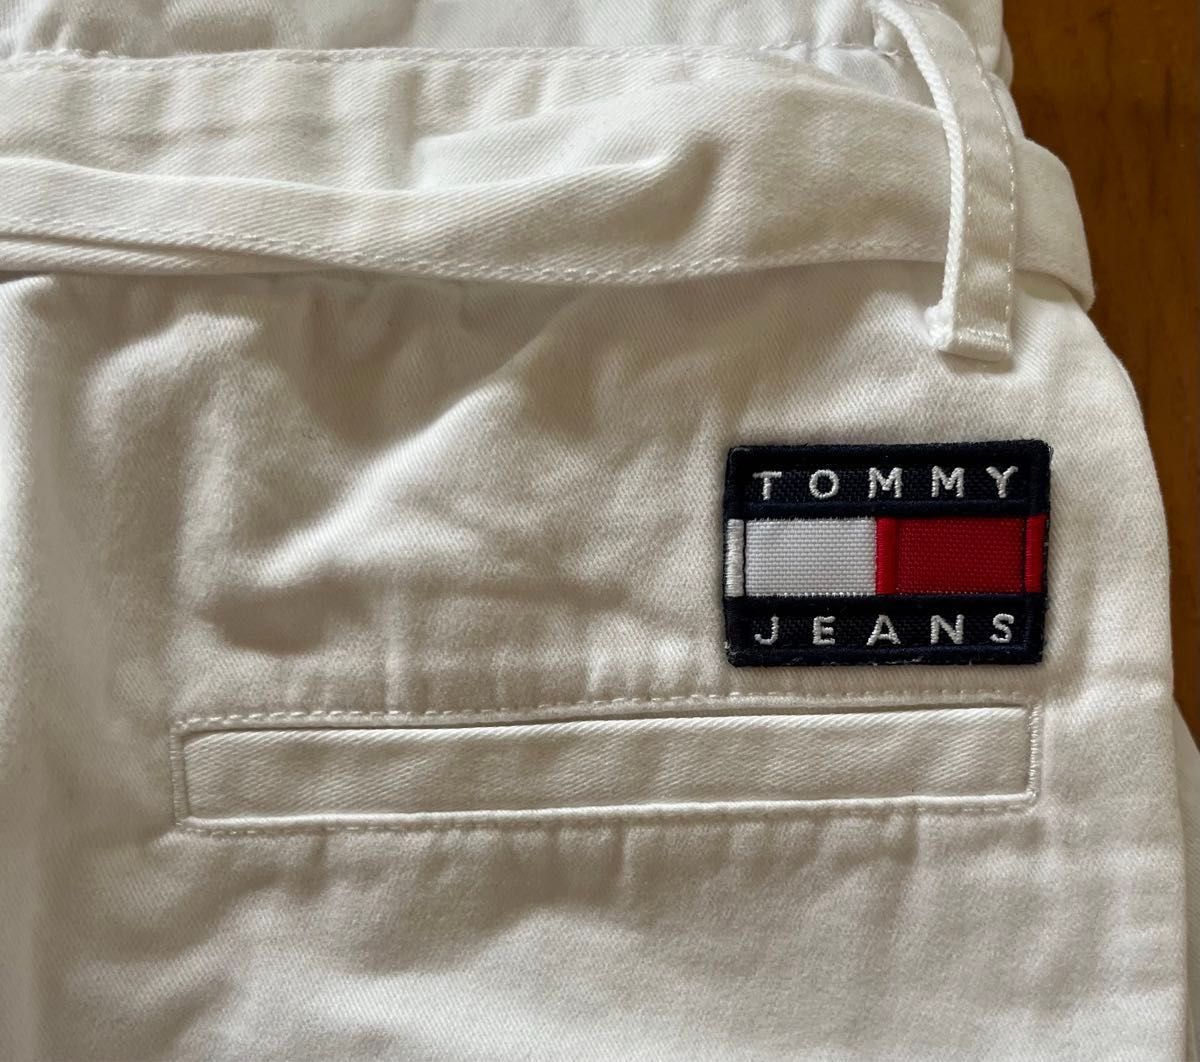 TOMMY JEANS トミージーンズ ミニスカートリボン